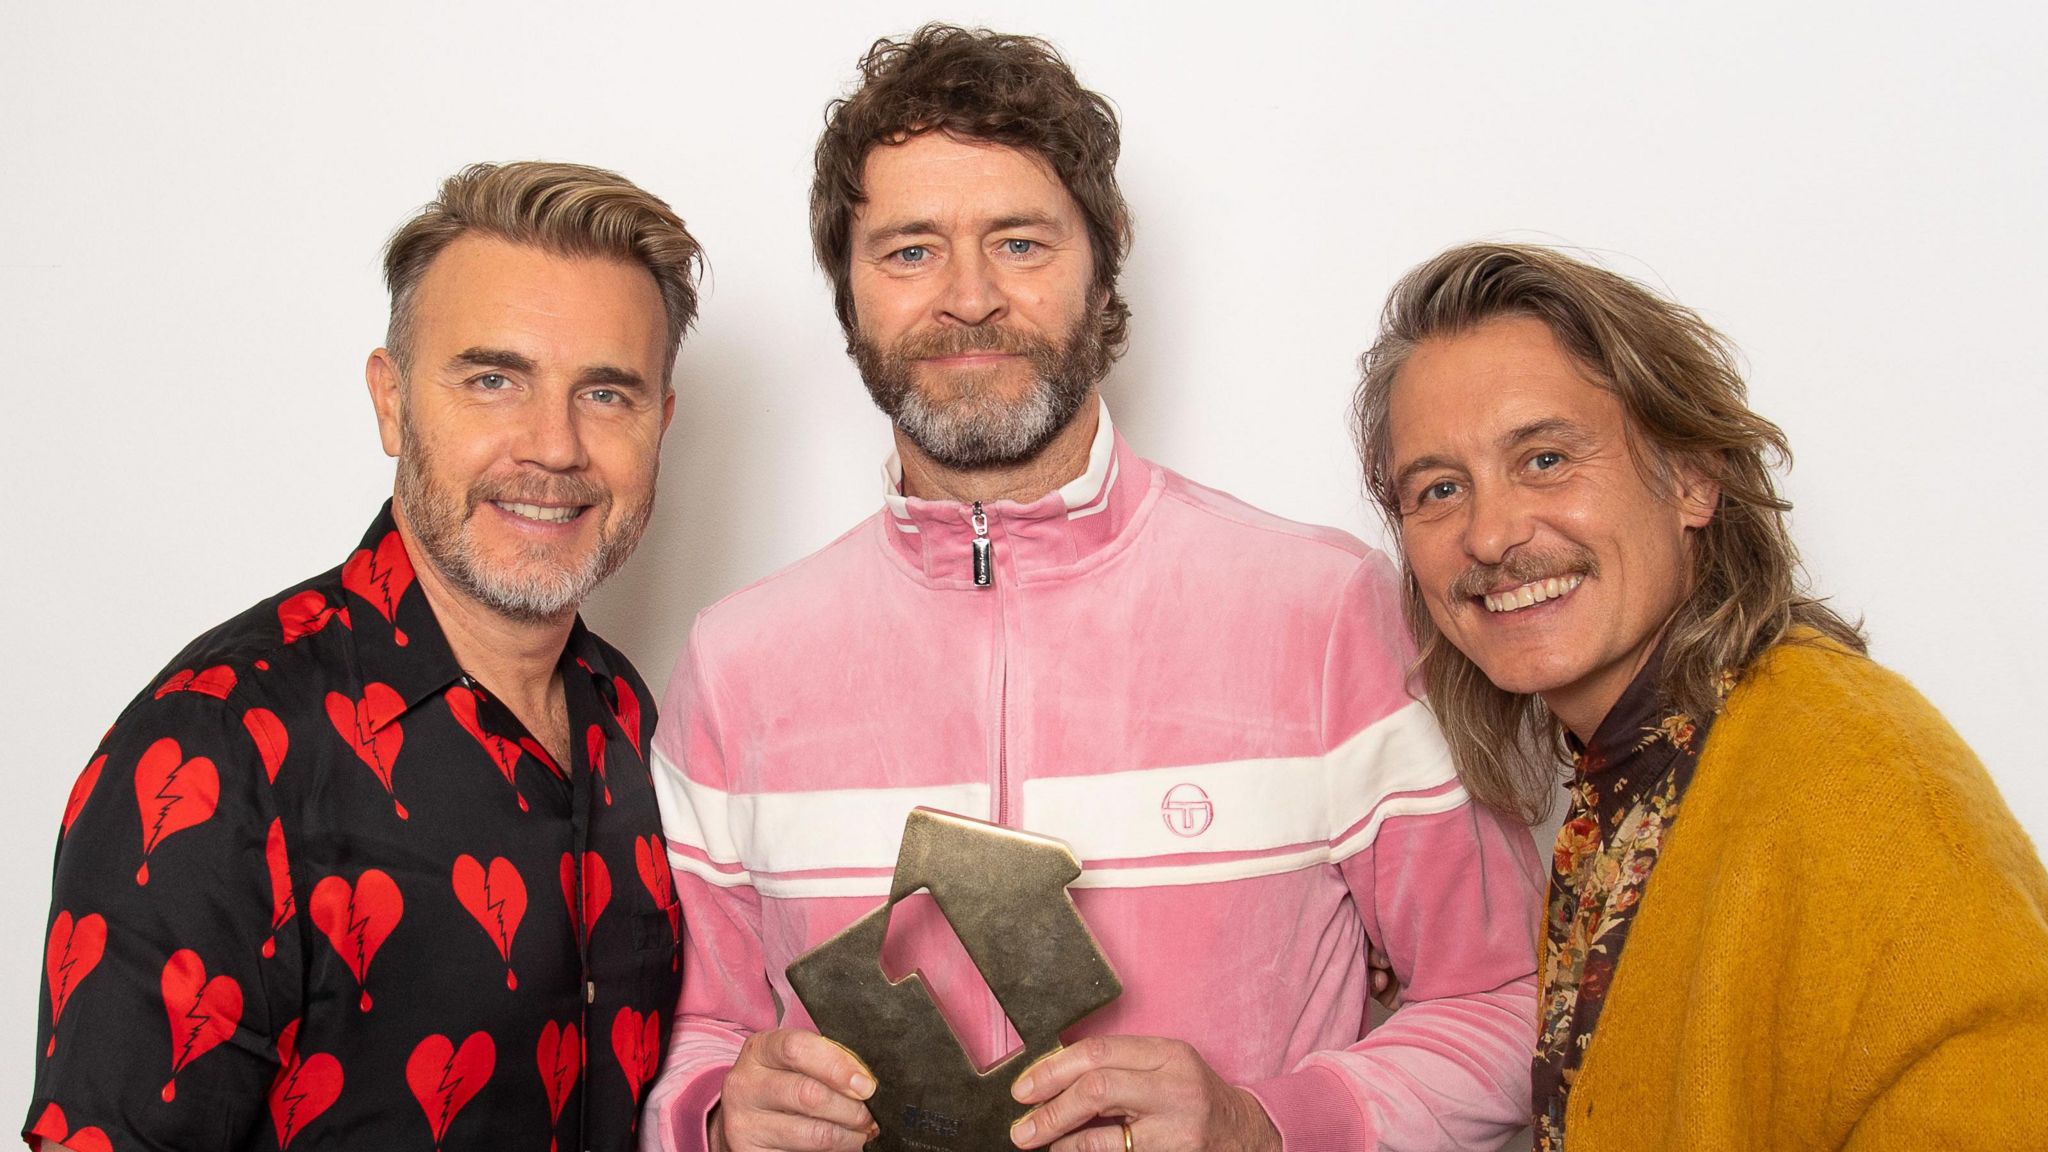 Gary Barlow, Howard Donald and Mark Owen, with Howard Donald holding a Number 1 award for their number one album This Life in December 2023